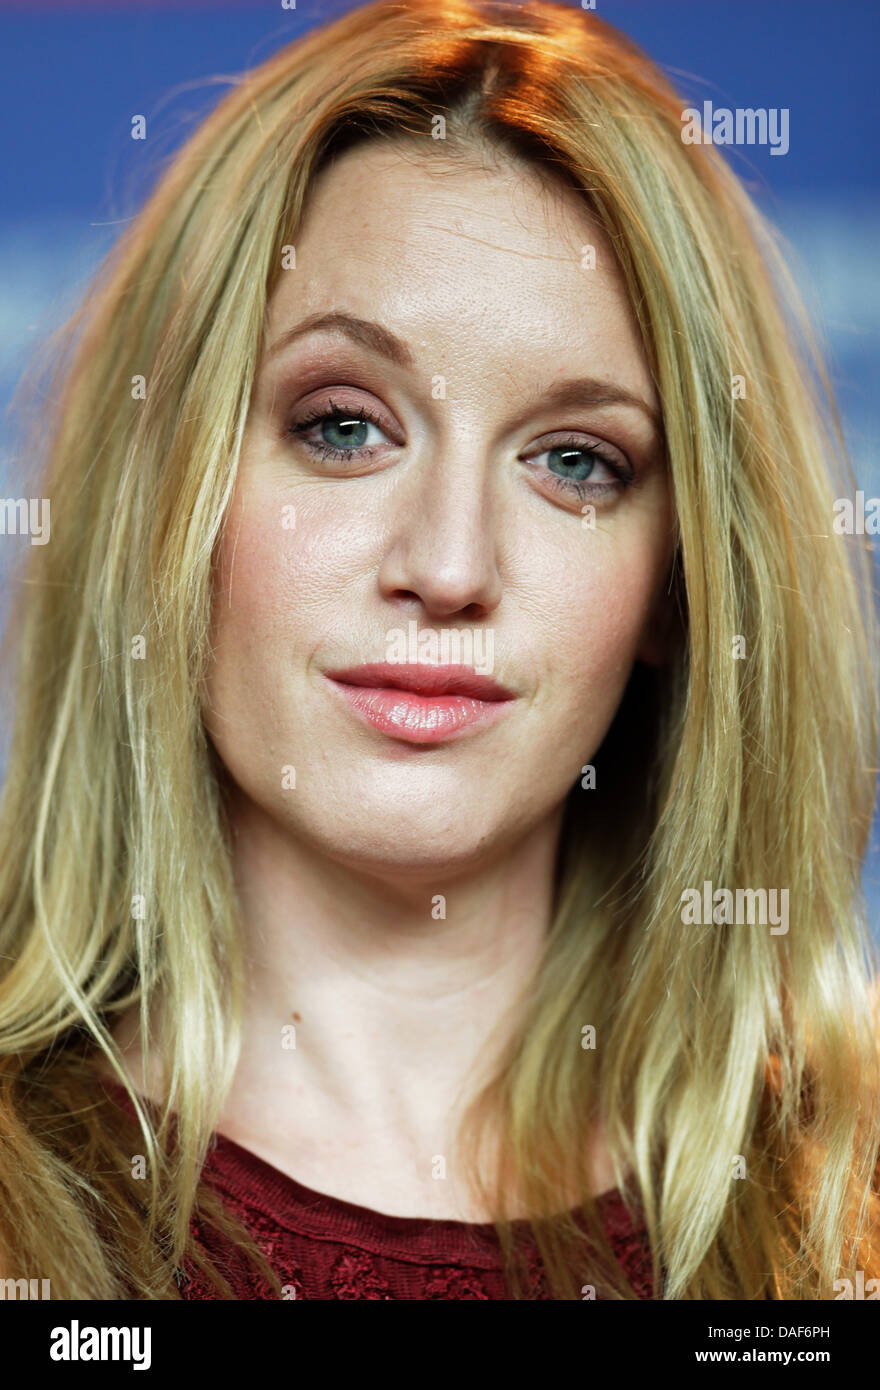 French actress Ludivine Sagnier poses at a photocall for the film 'The Devil's Double' (during the 61st Berlin International Film Festival in Berlin, Germany on 11 February 2011. The film is running in the section Panorama special of the International Film Festival. The 61st Berlinale takes place from 10 to 20 February 2011. Photo: Michael Kappeler Stock Photo